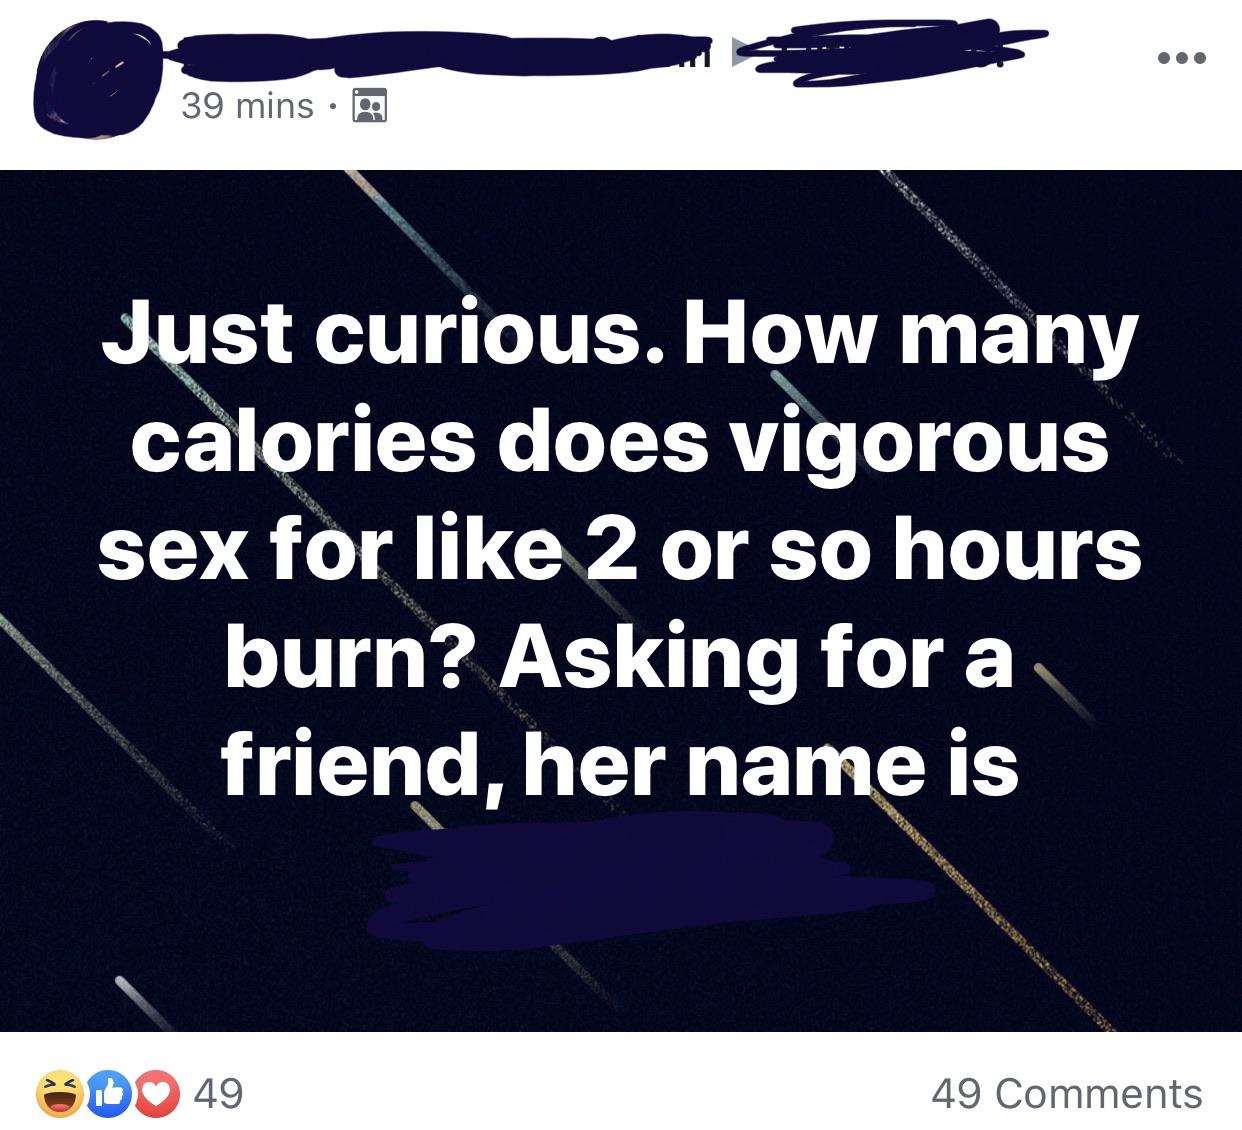 funny computer - 39 mins Just curious. How many calories does vigorous sex for 2 or so hours burn? Asking for a friend, her name is Do 49 49